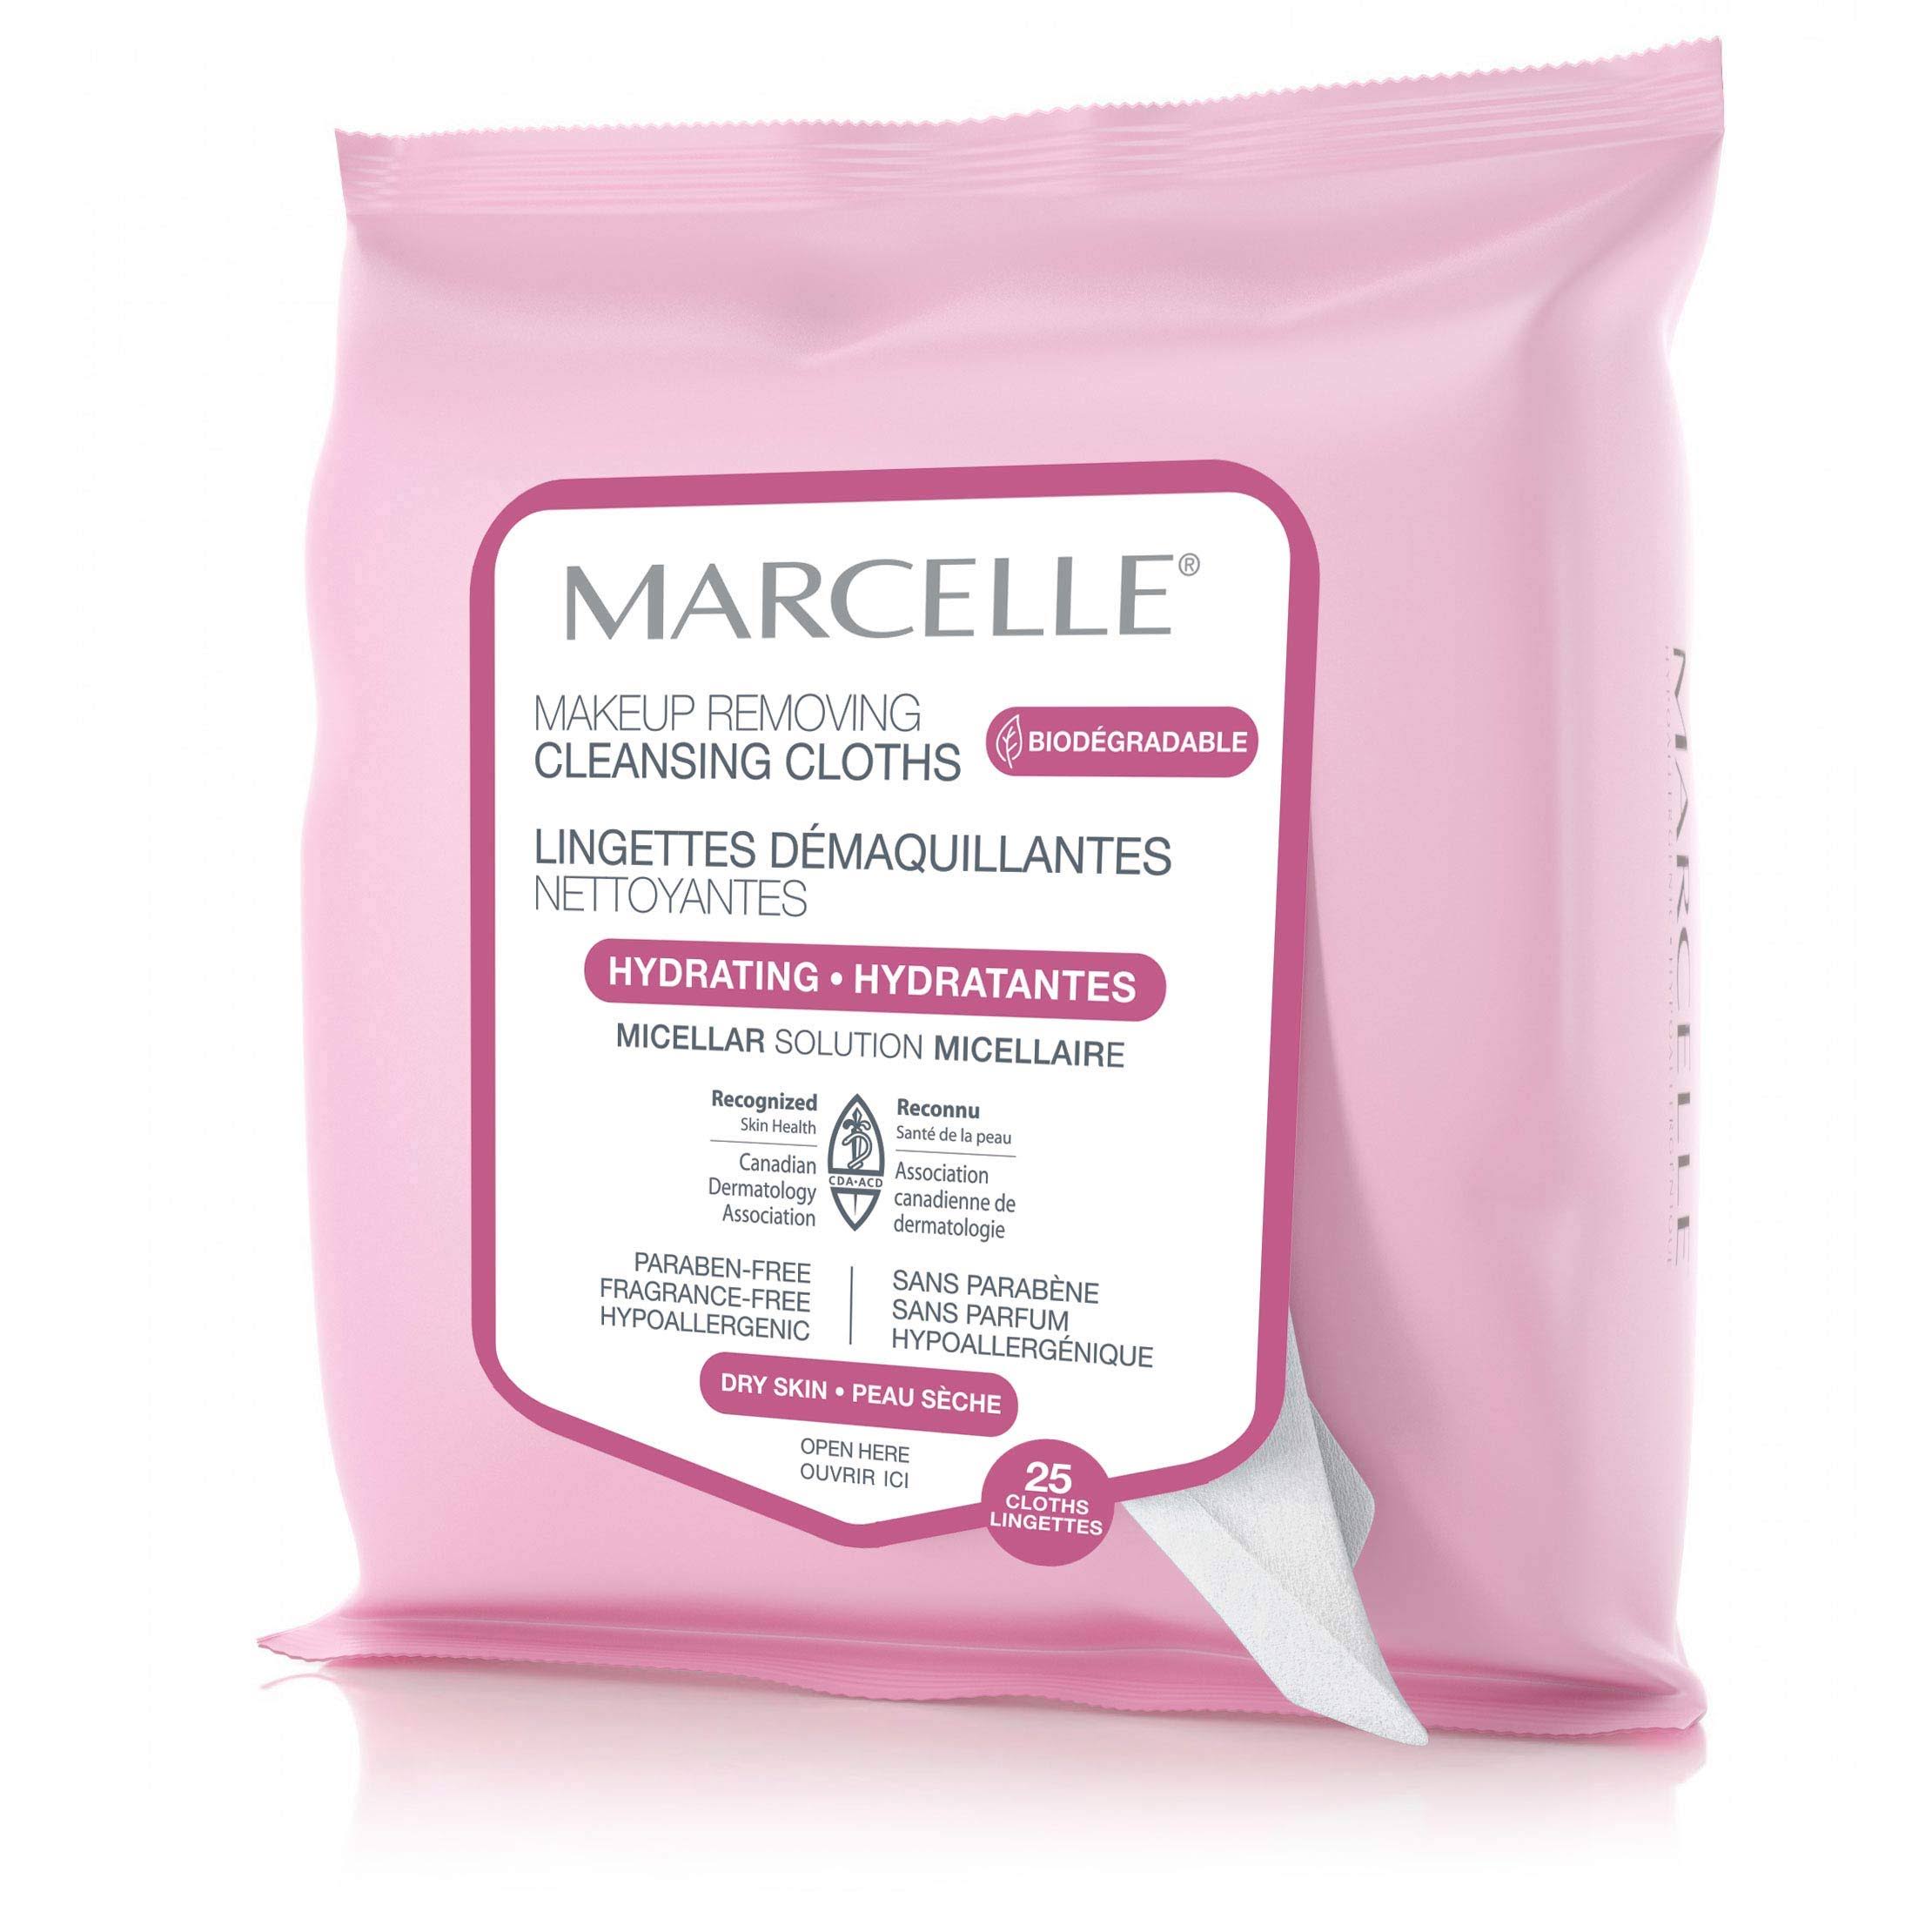 Marcelle Hydrating Makeup Removing Cleansing Cloths